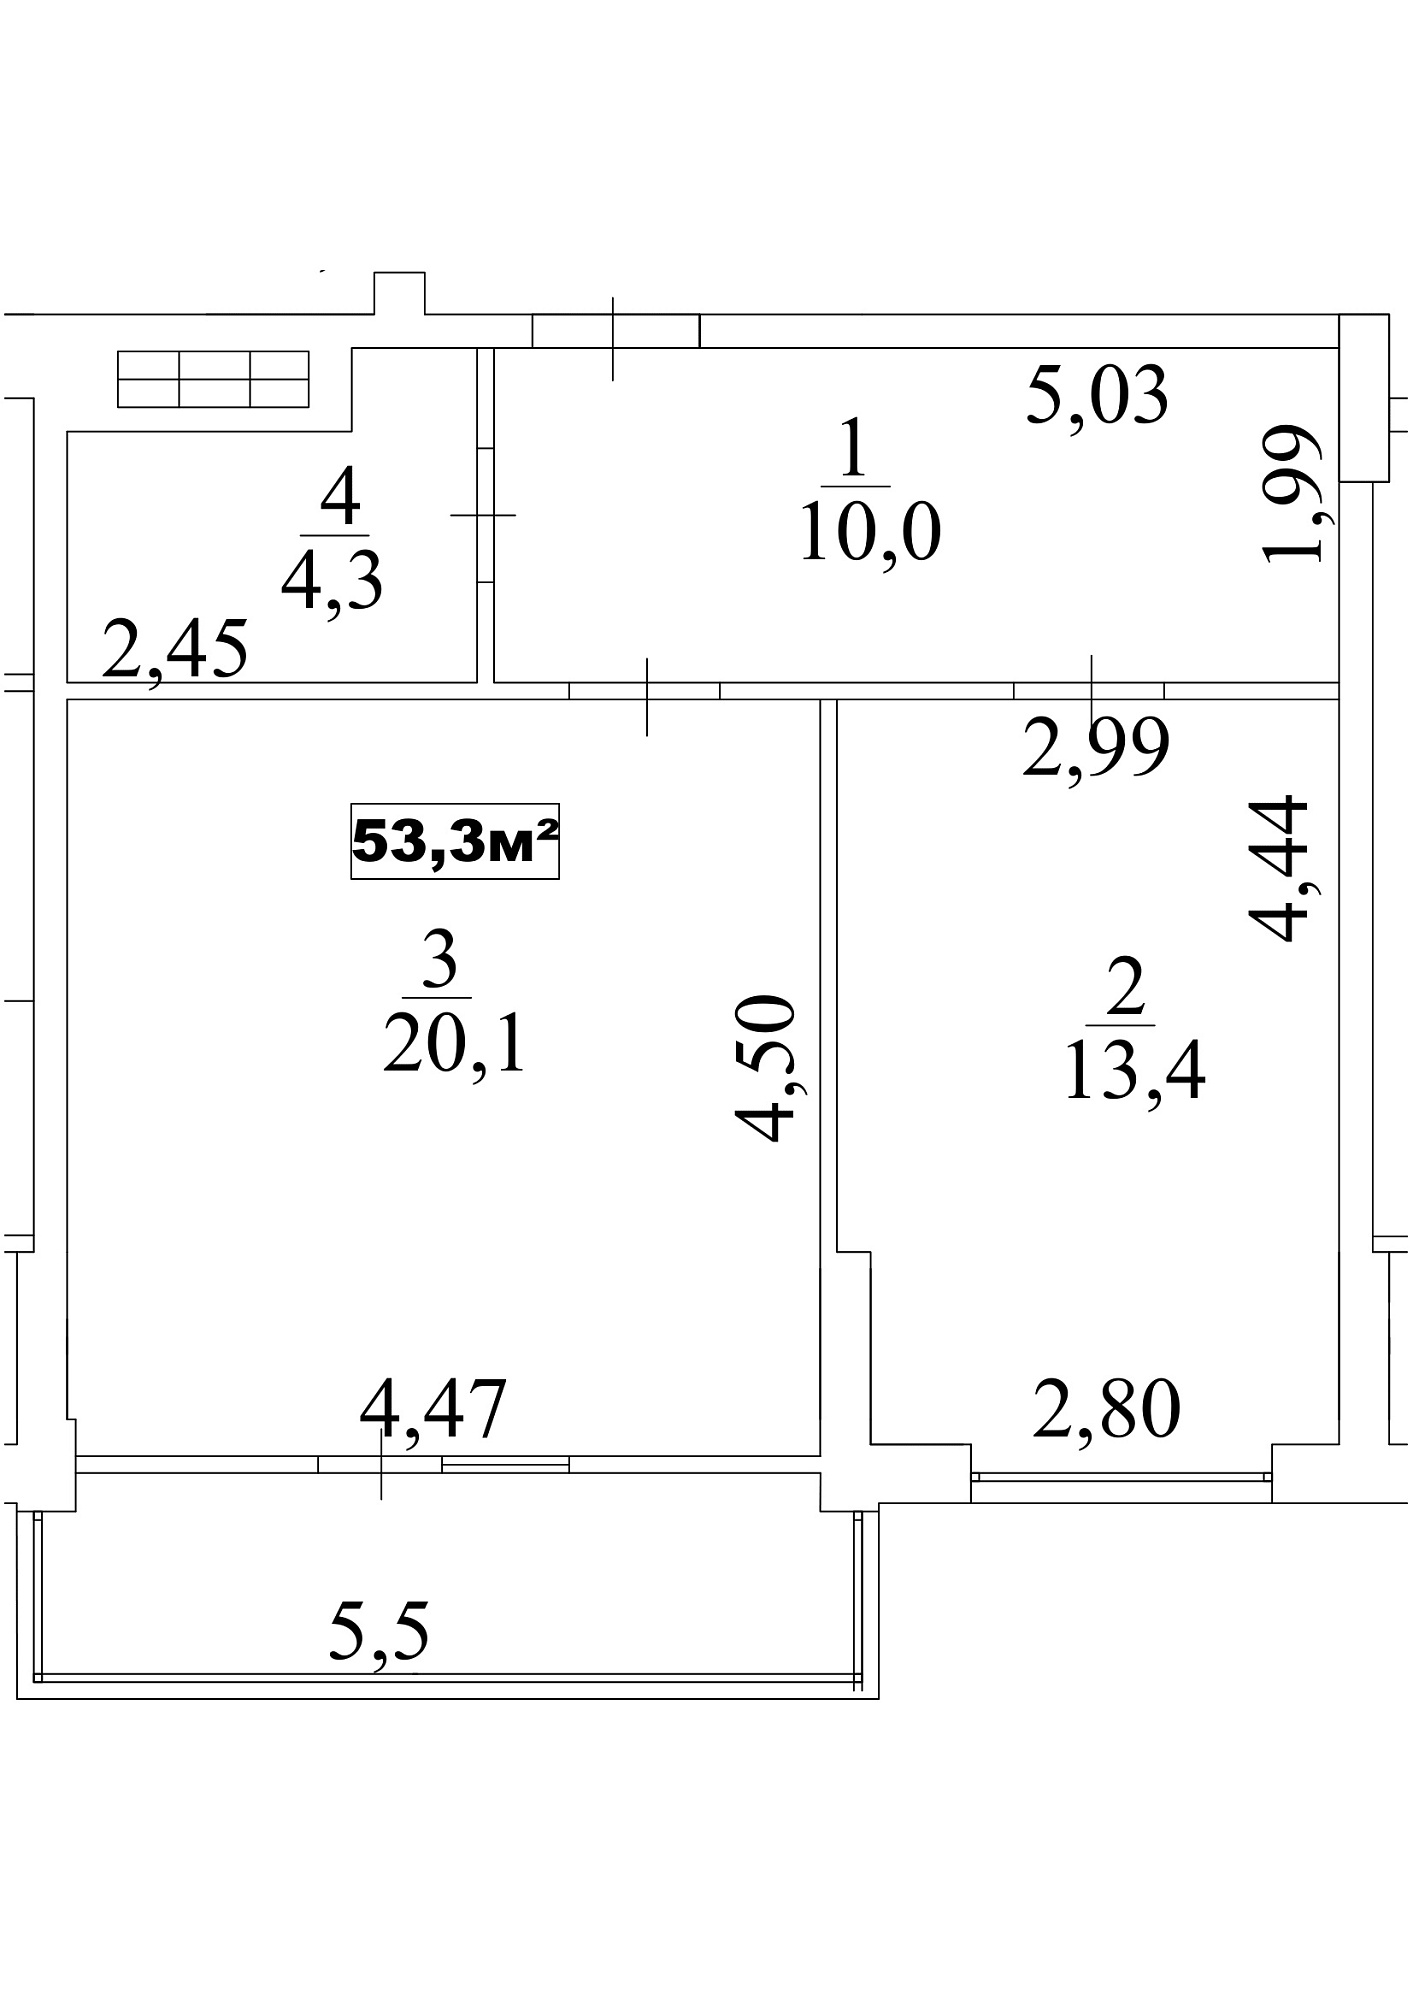 Planning 1-rm flats area 53.3m2, AB-10-06/00053.